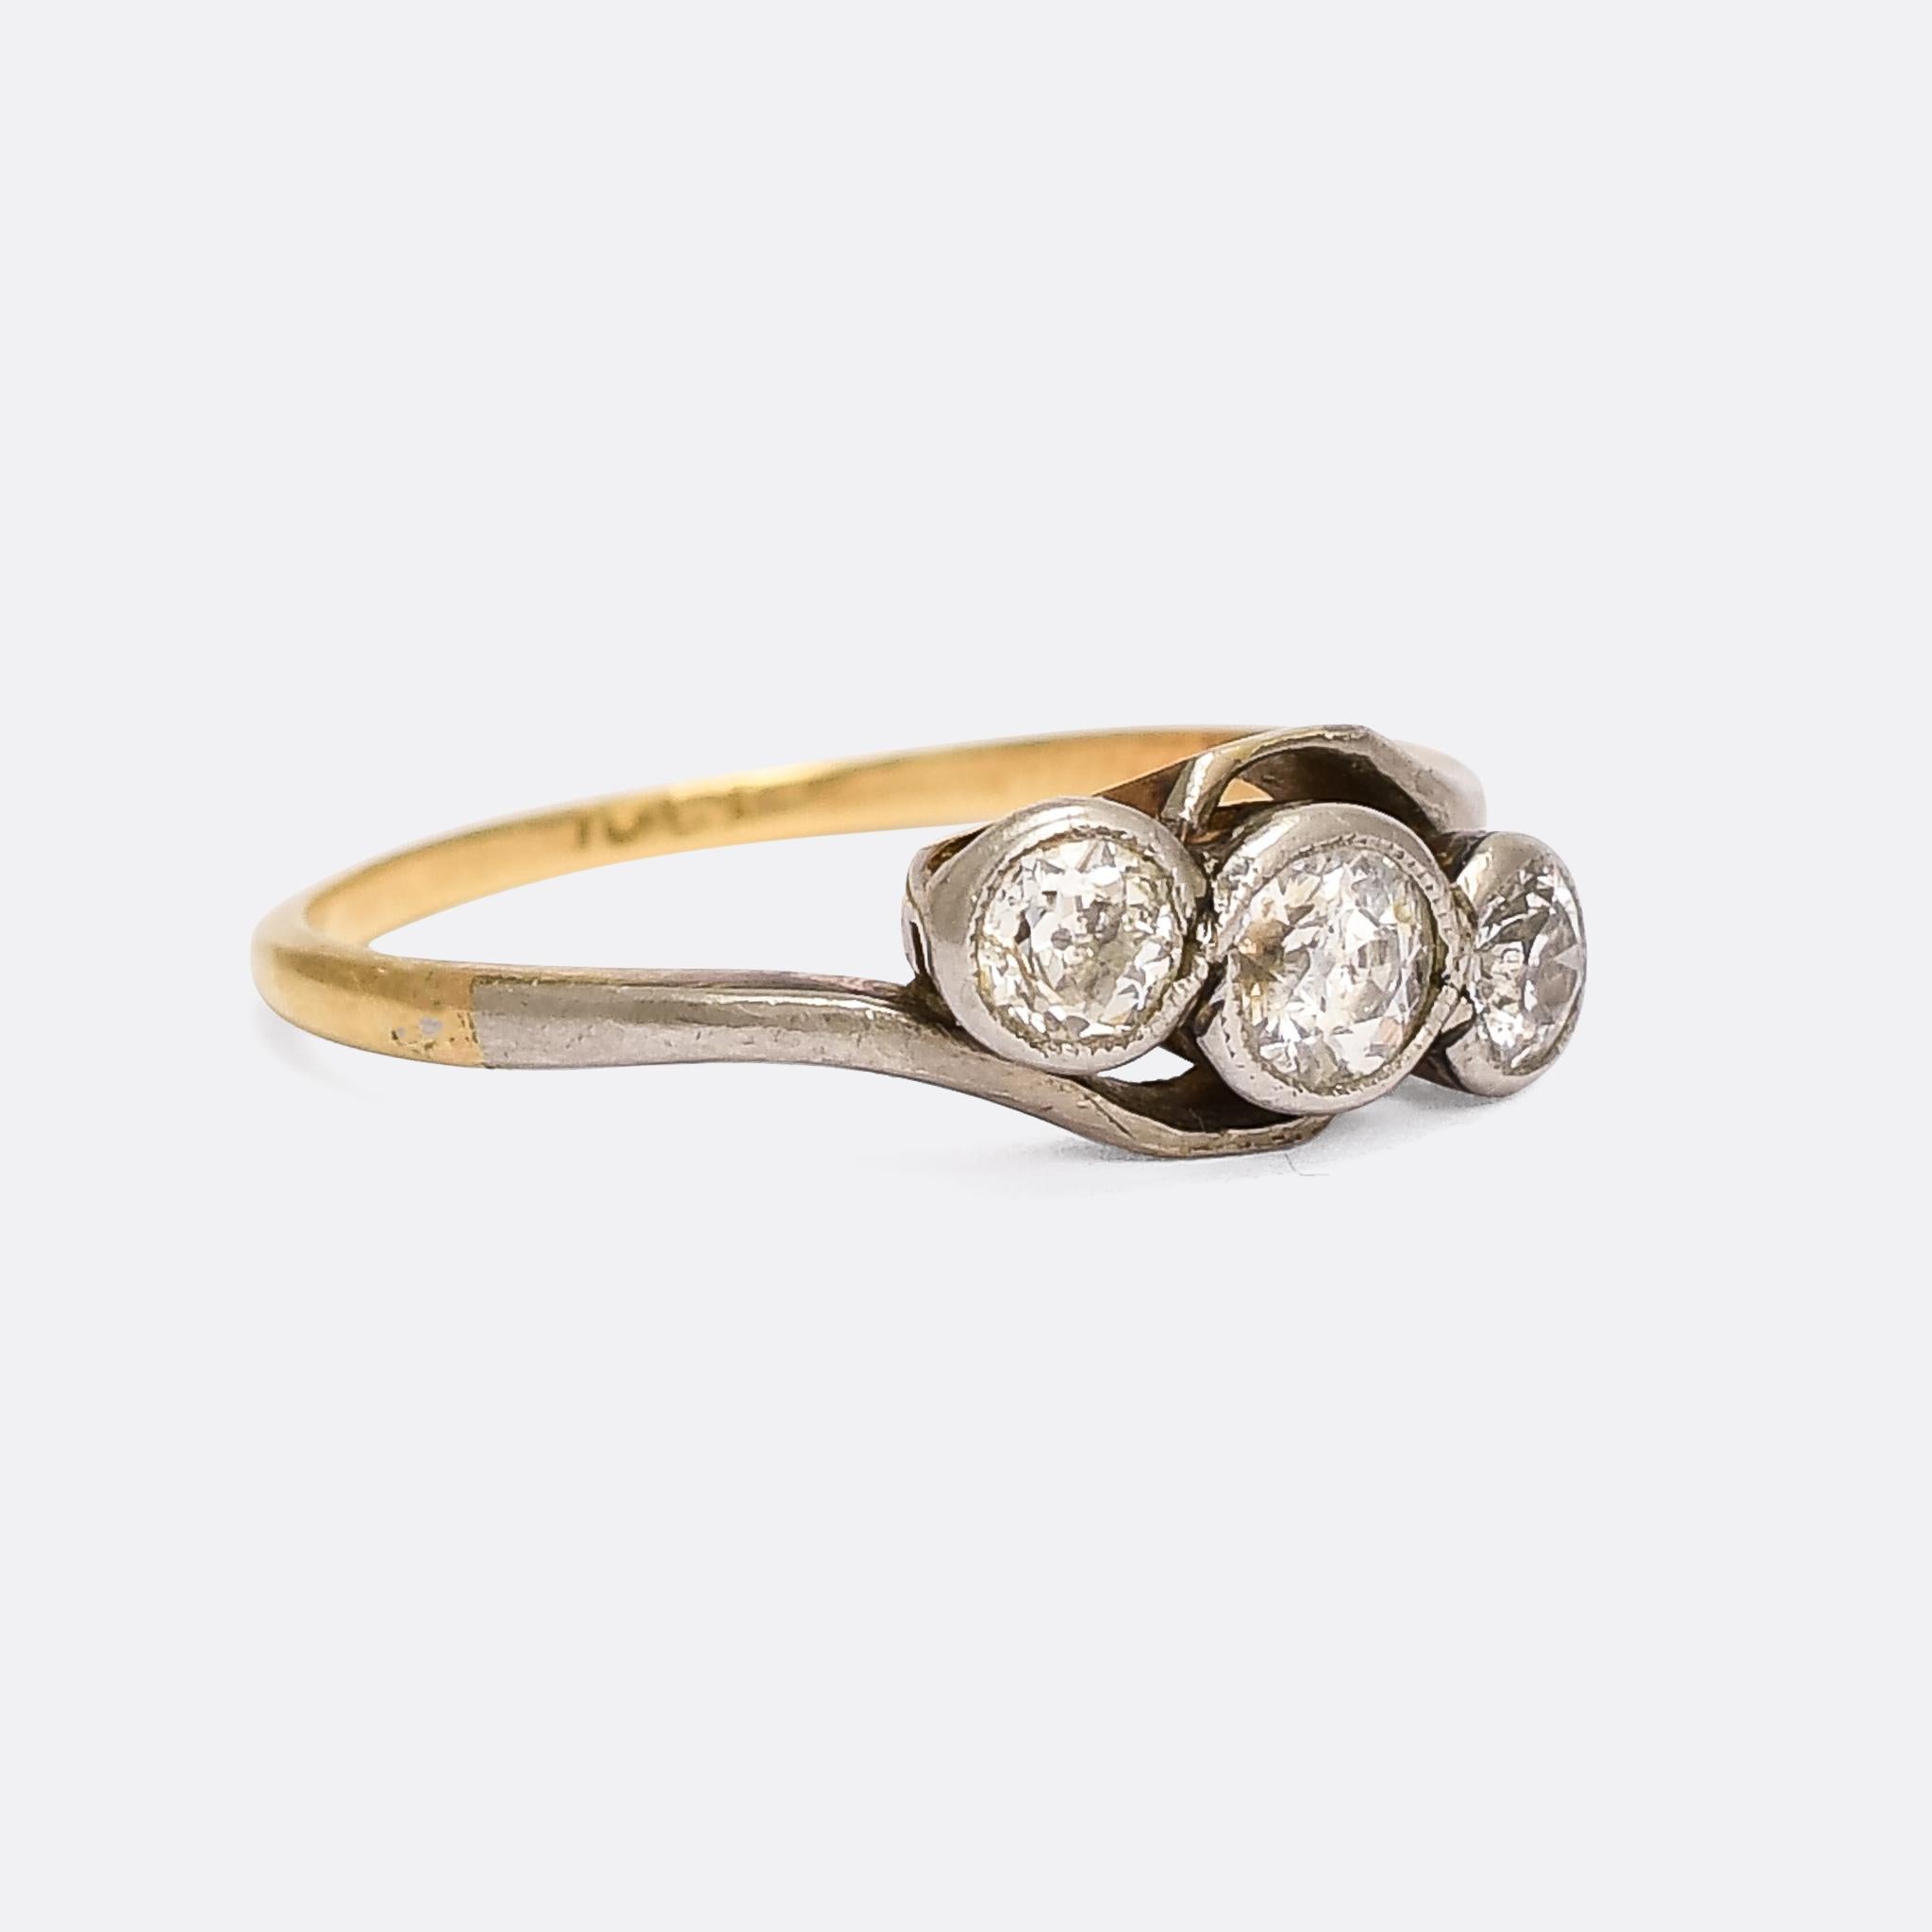 A very pretty turn of the century three stone diamond engagement ring commonly referred to as crossover ring because of the illusion of crossing shoulders. The three sparkling transitional cut diamonds total a little under a carat in weight, and the